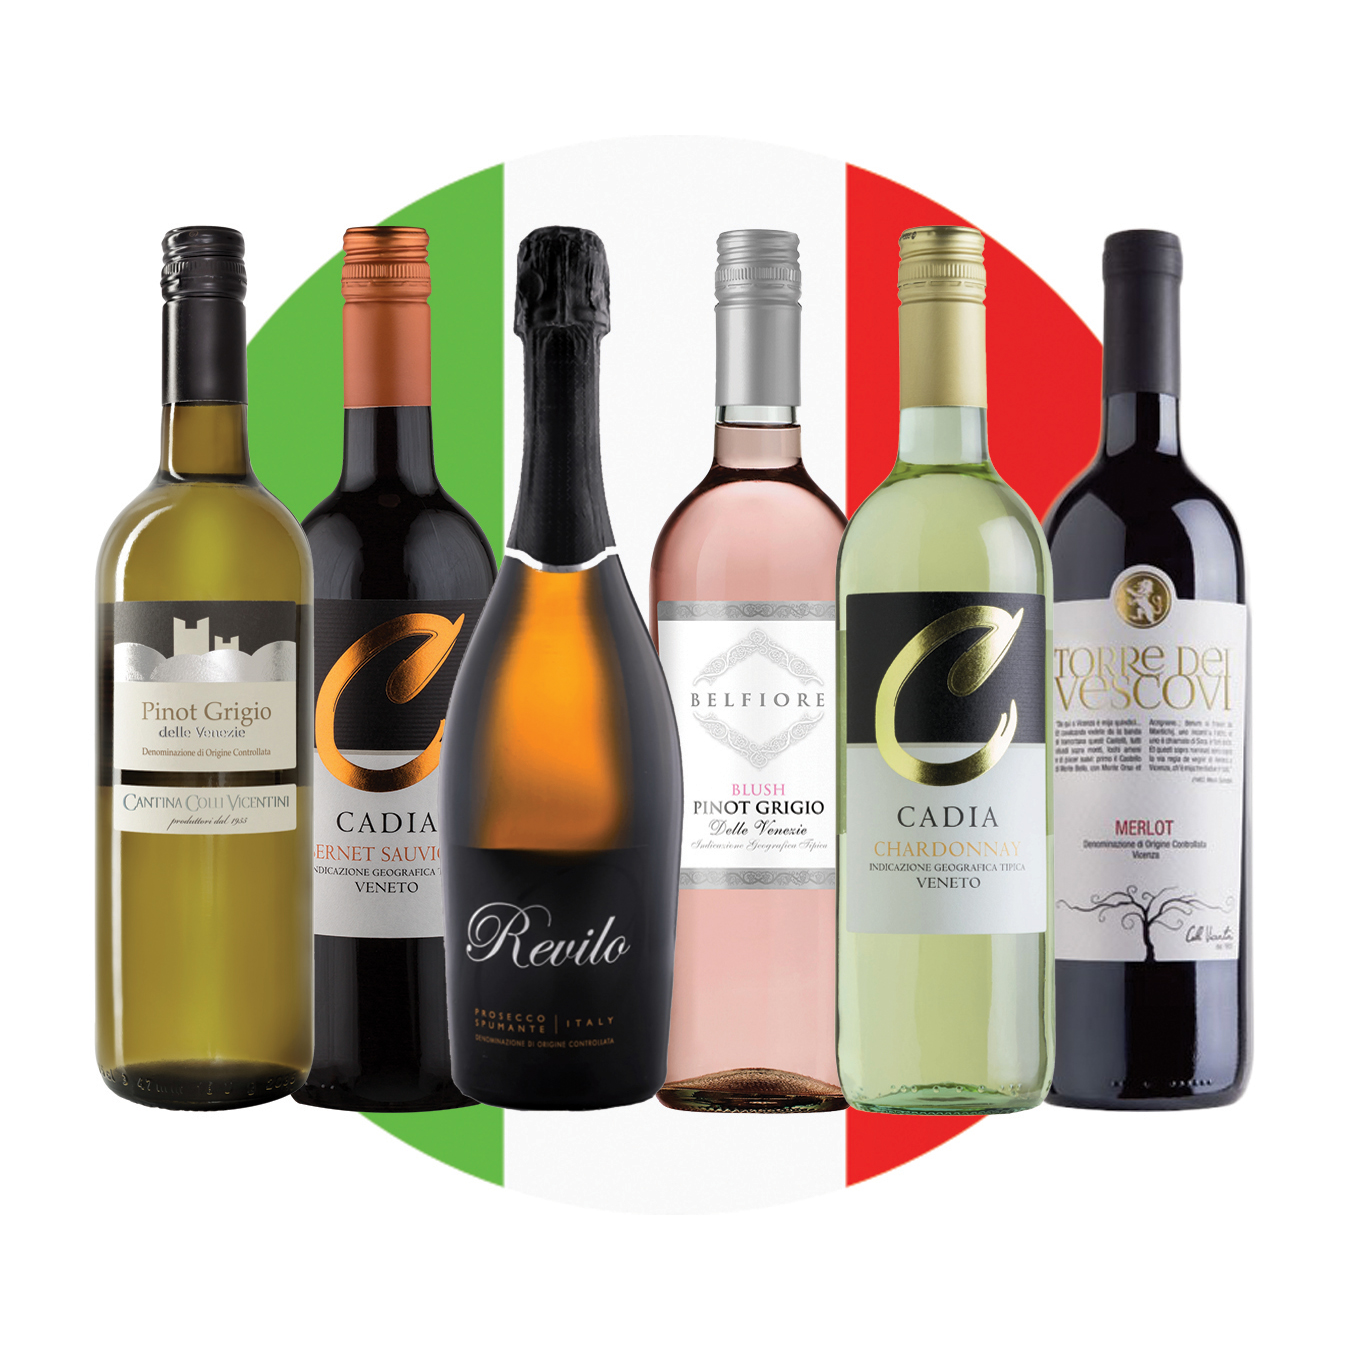 Experience Italy Wine Case of 6